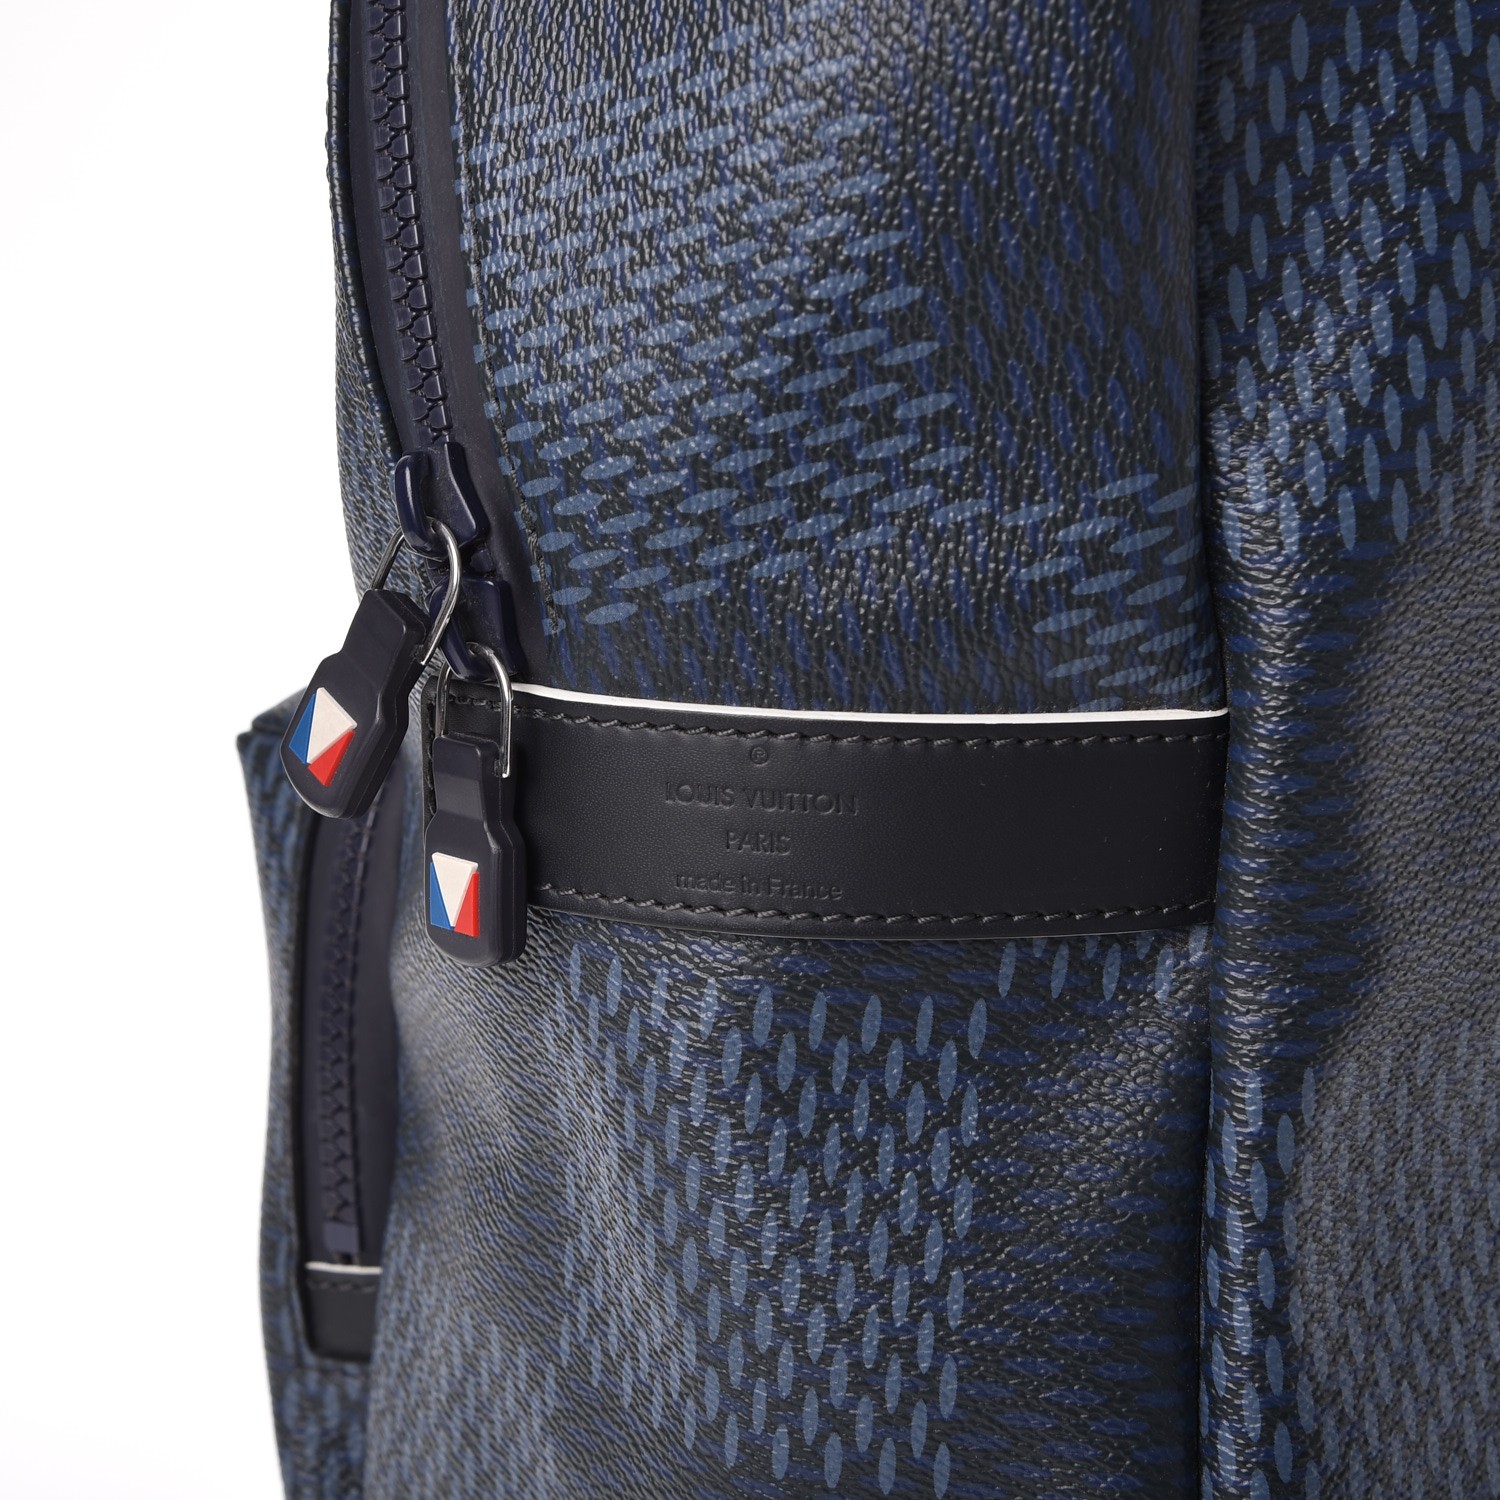 Matchpoint Hybrid Damier Cobalt Backpack – Luxuria & Co.